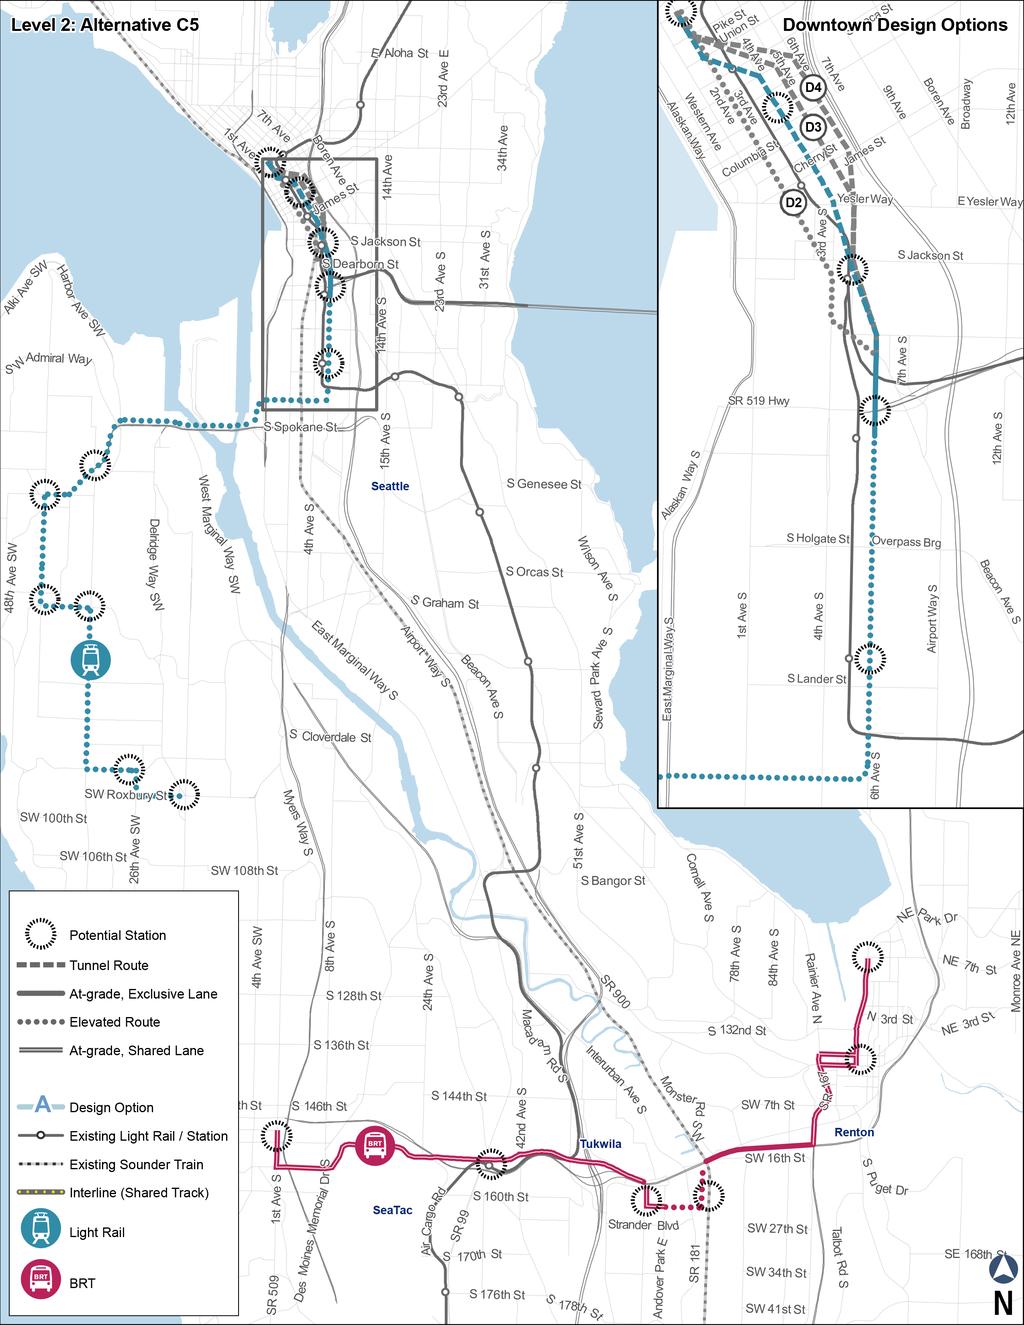 South King County High Capacity Transit Corridor Report Alternative C5 LRT to White Center; Burien/Renton BRT Alternative C5 includes an LRT alignment with connections between Downtown Seattle, West